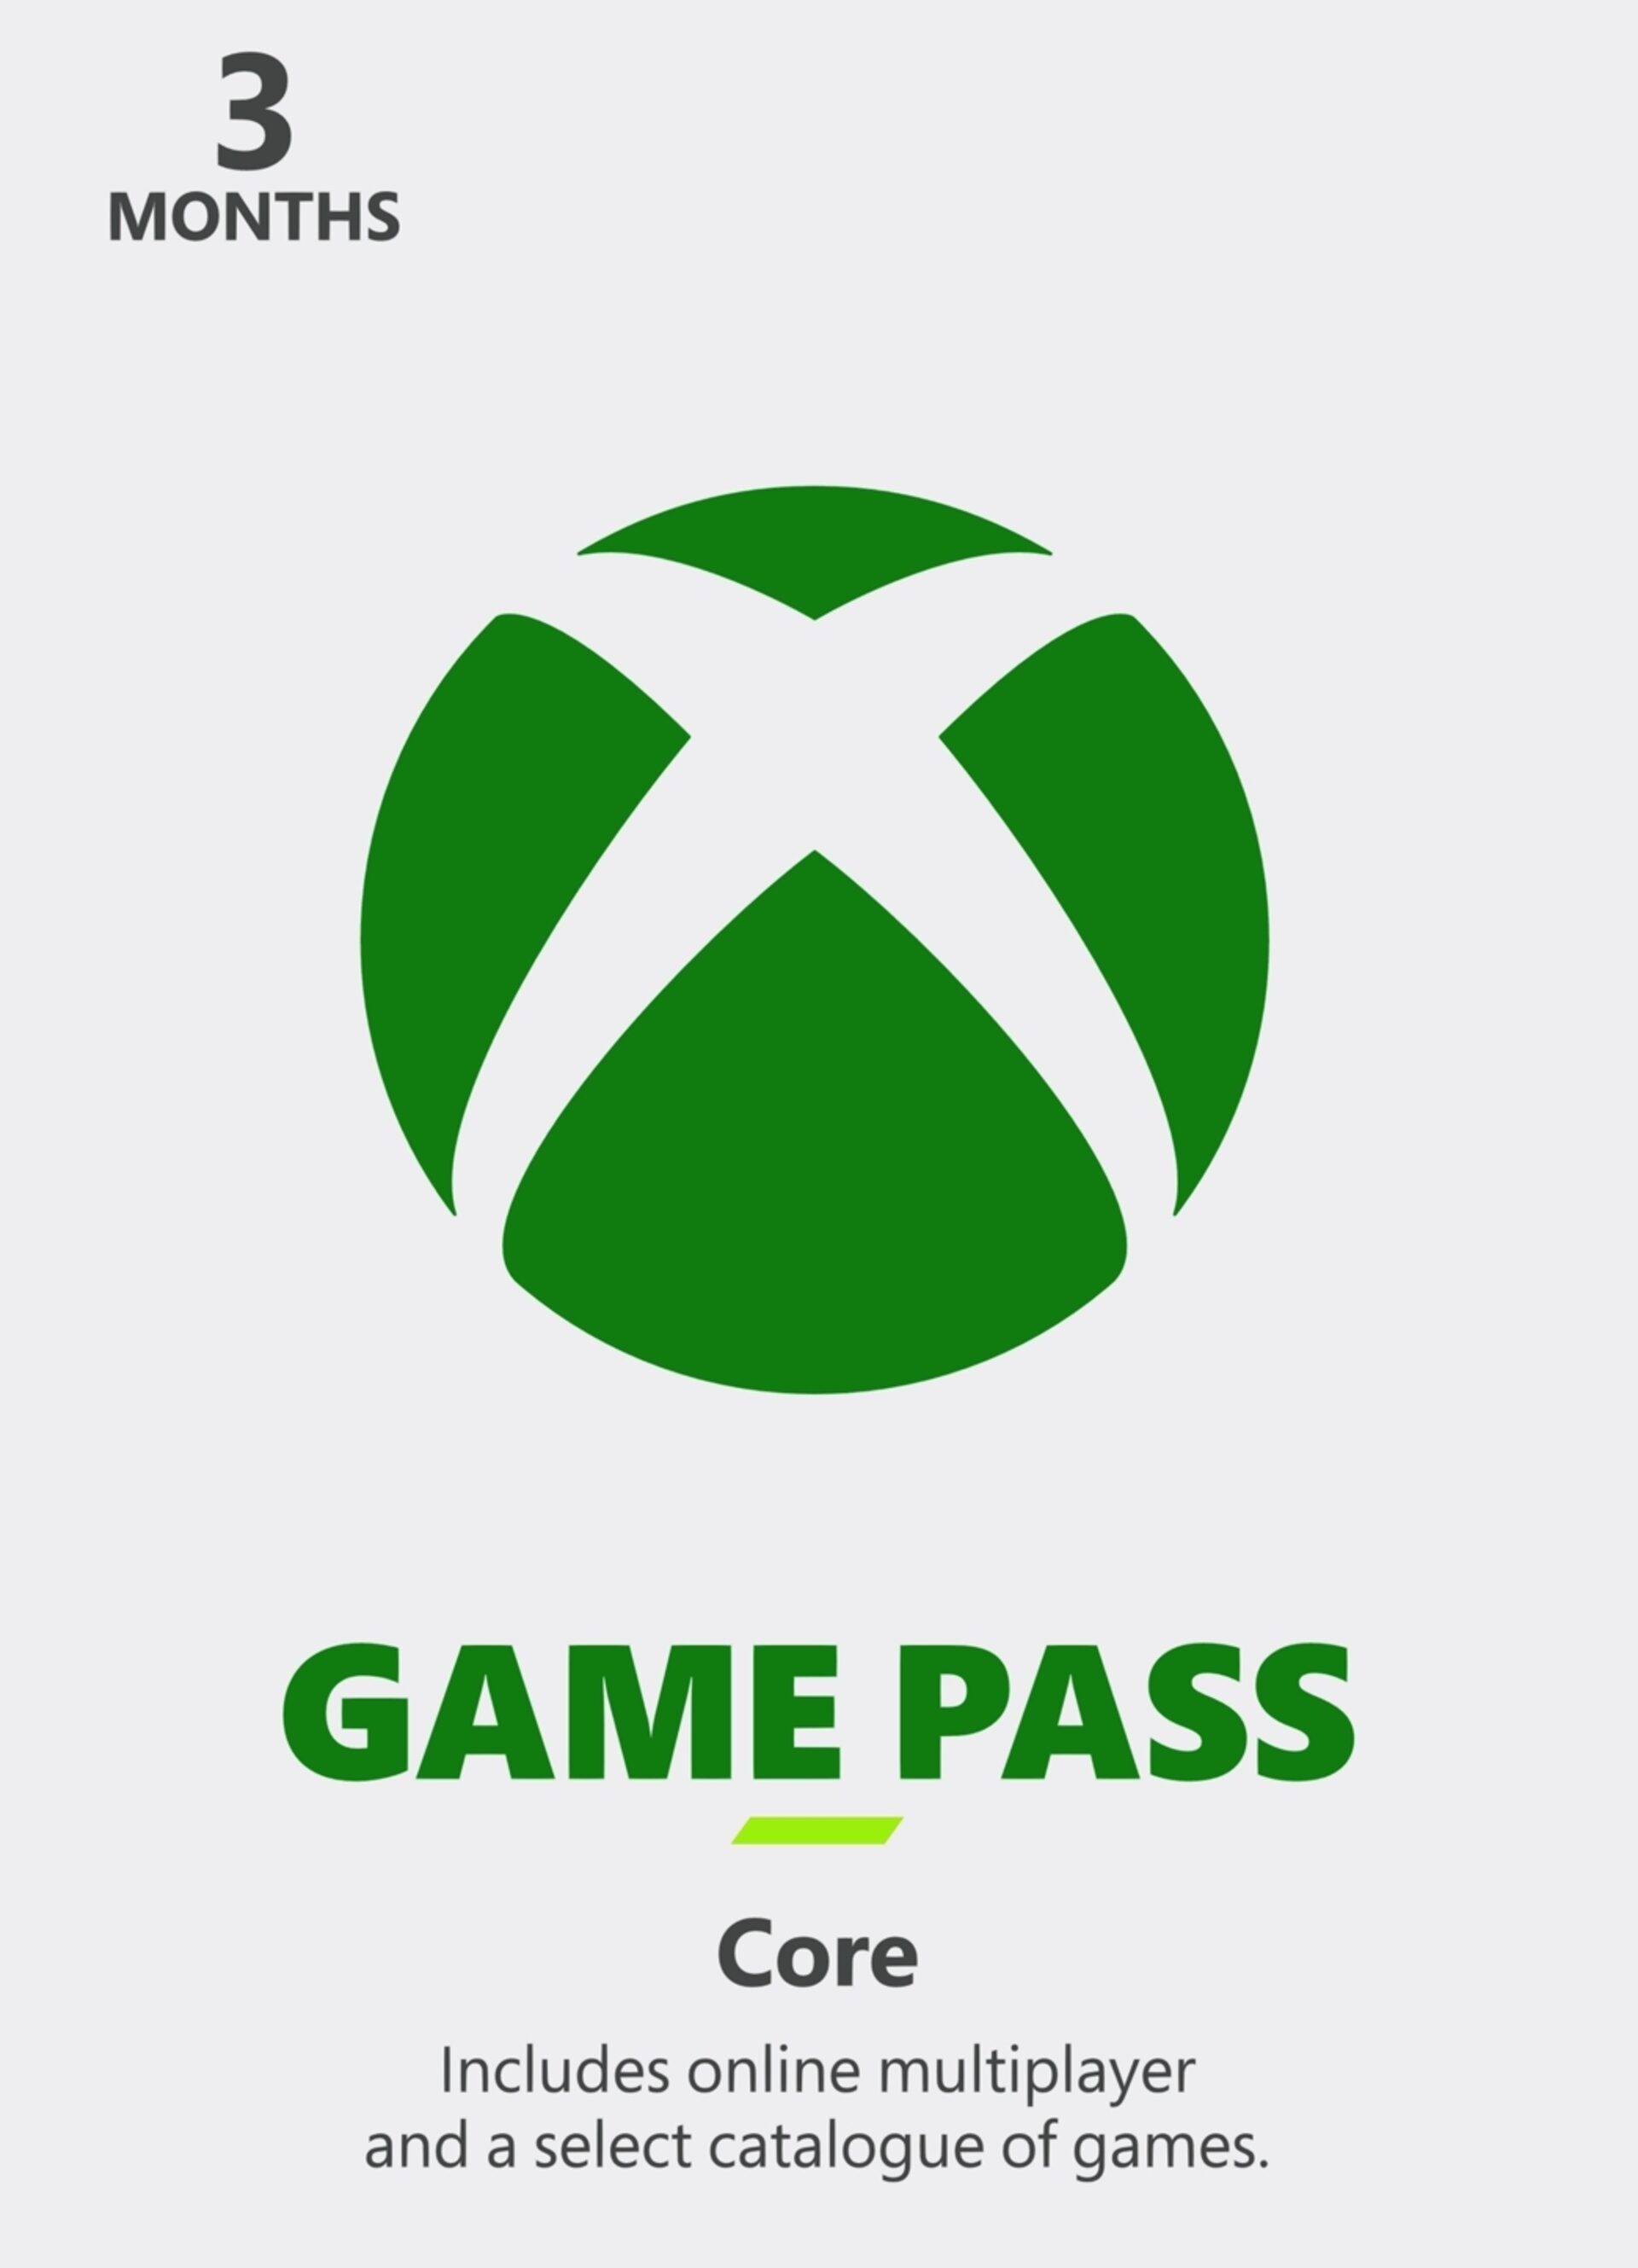 Xbox Game Pass Ultimate includes PC and Xbox games for $14.99 per